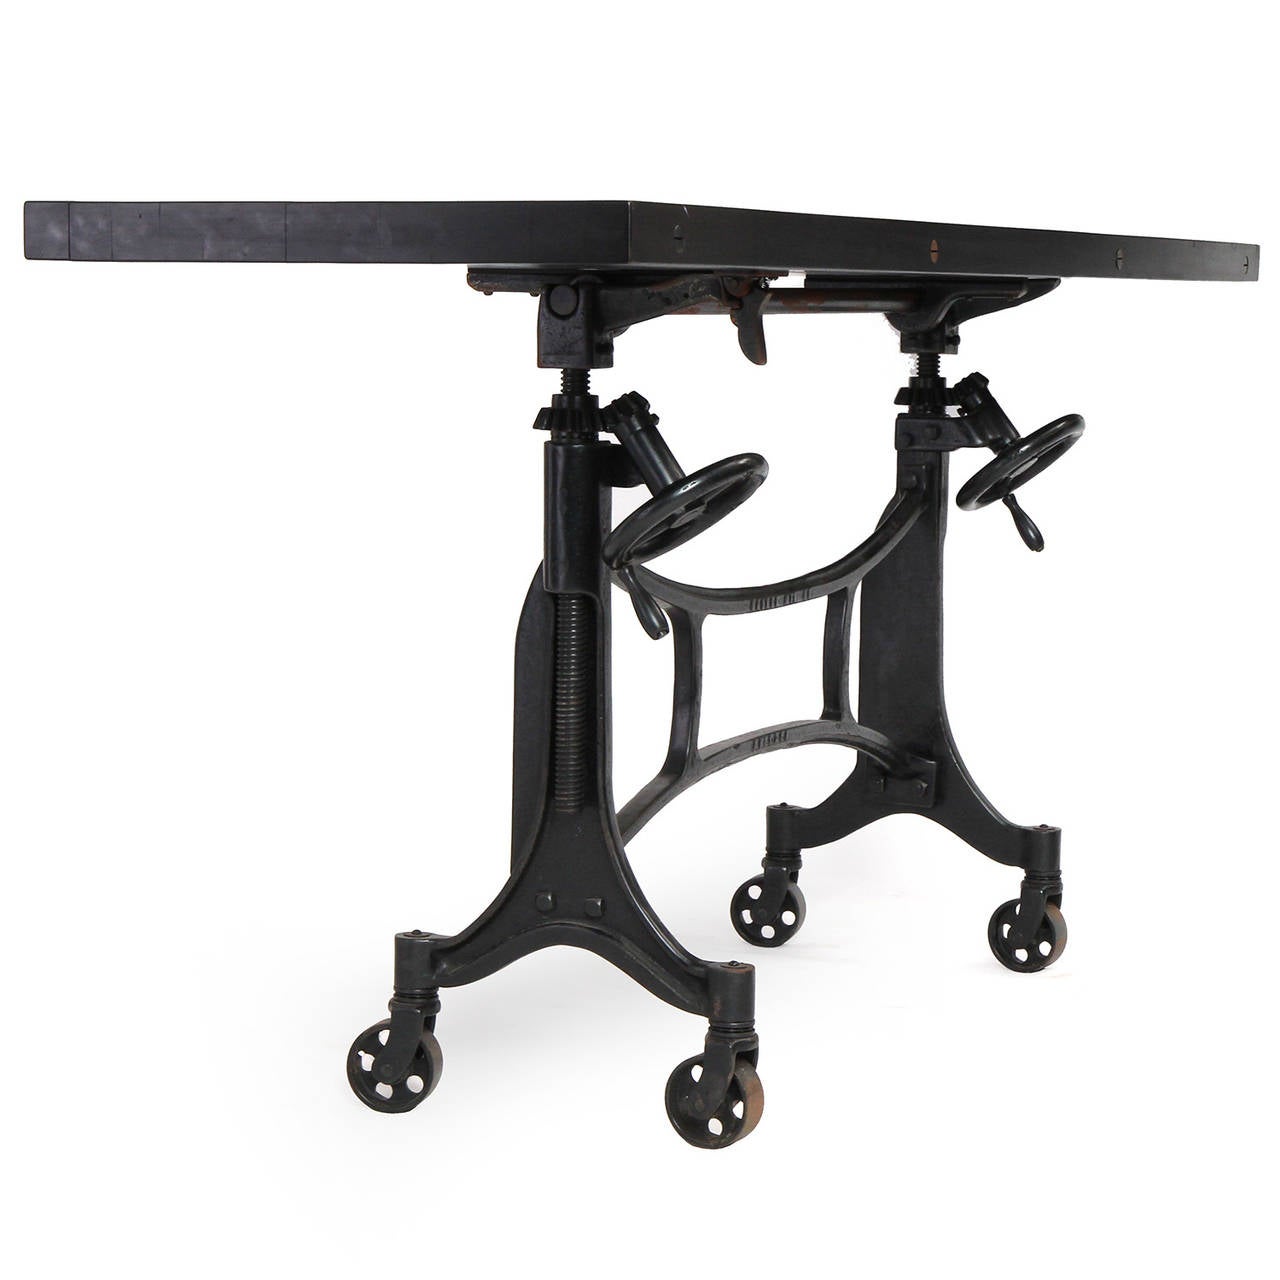 Adjustable Industrial Table by Hamilton Manufacturing Co. In Good Condition For Sale In Sagaponack, NY